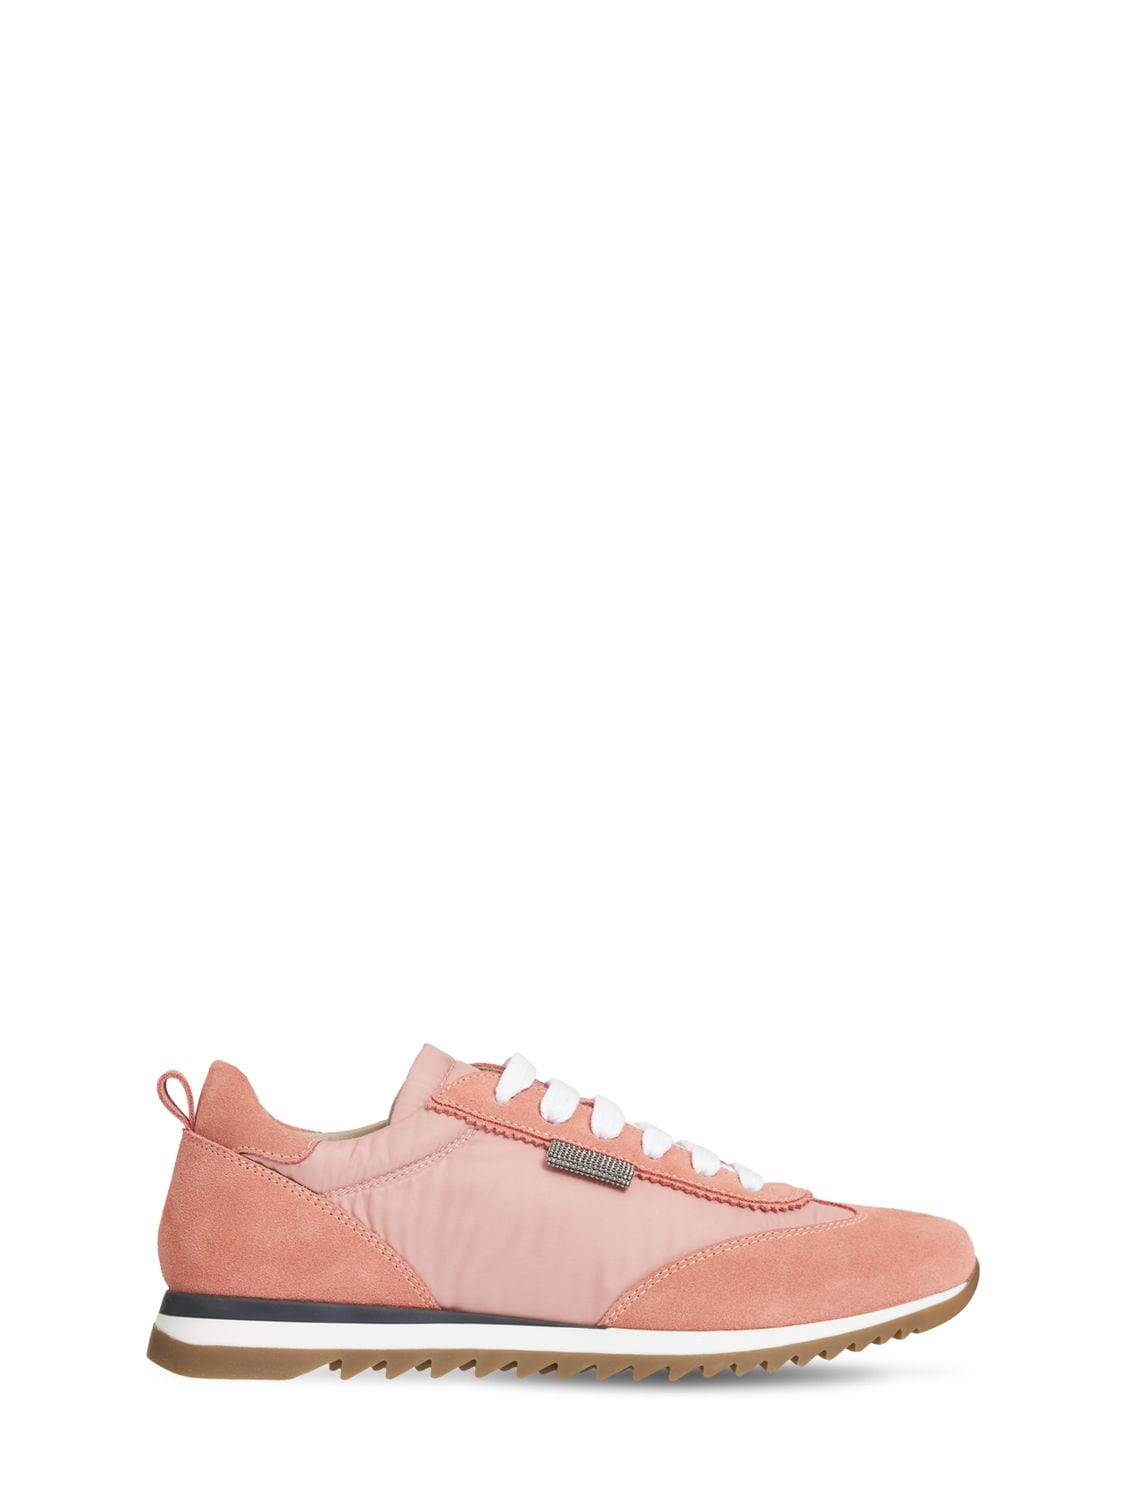 Nylon & Suede Lace-up Sneakers